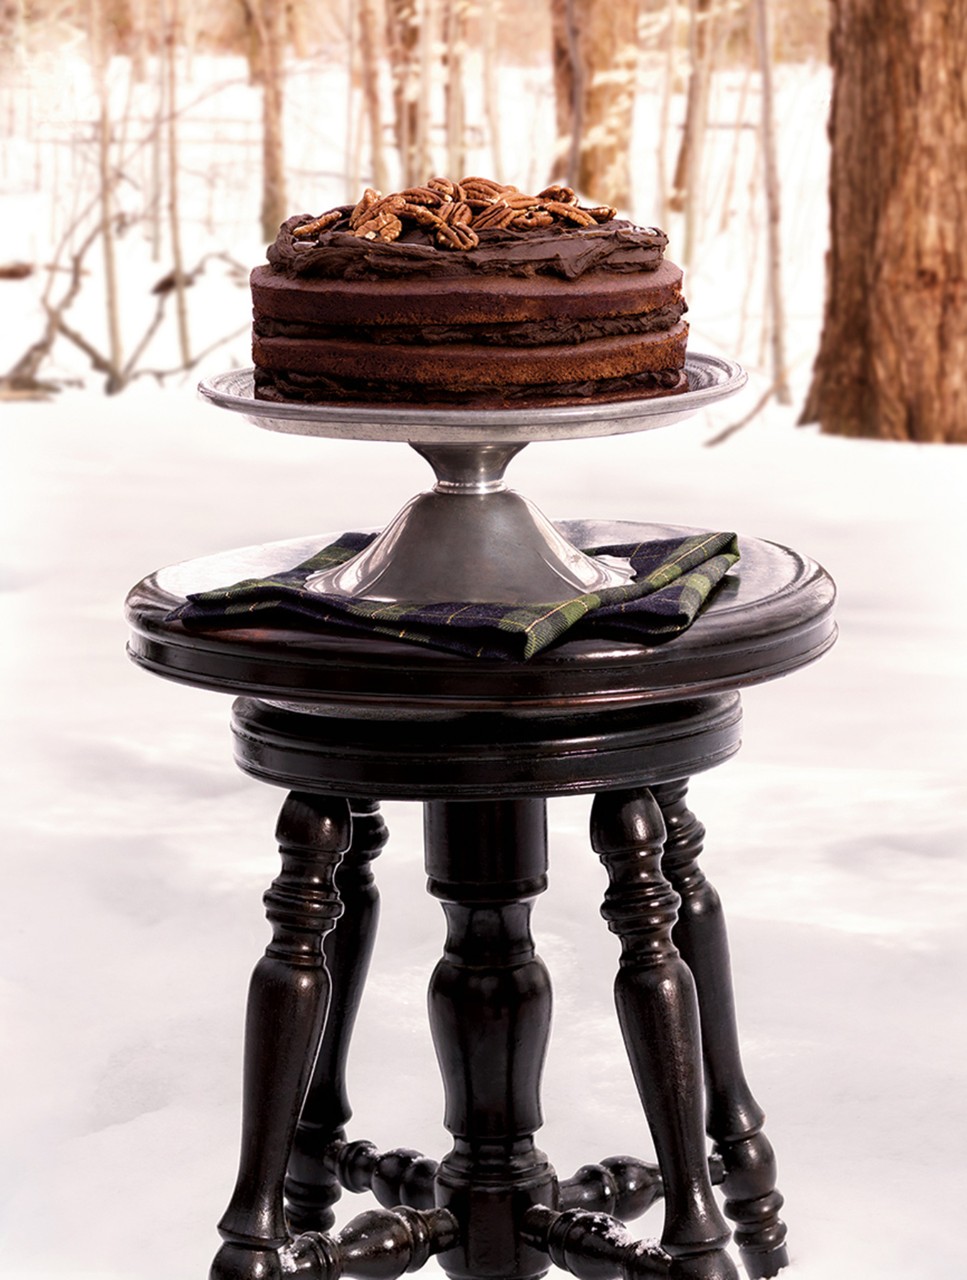 Chocolate Layer Cake with Maple-Pecan Frosting